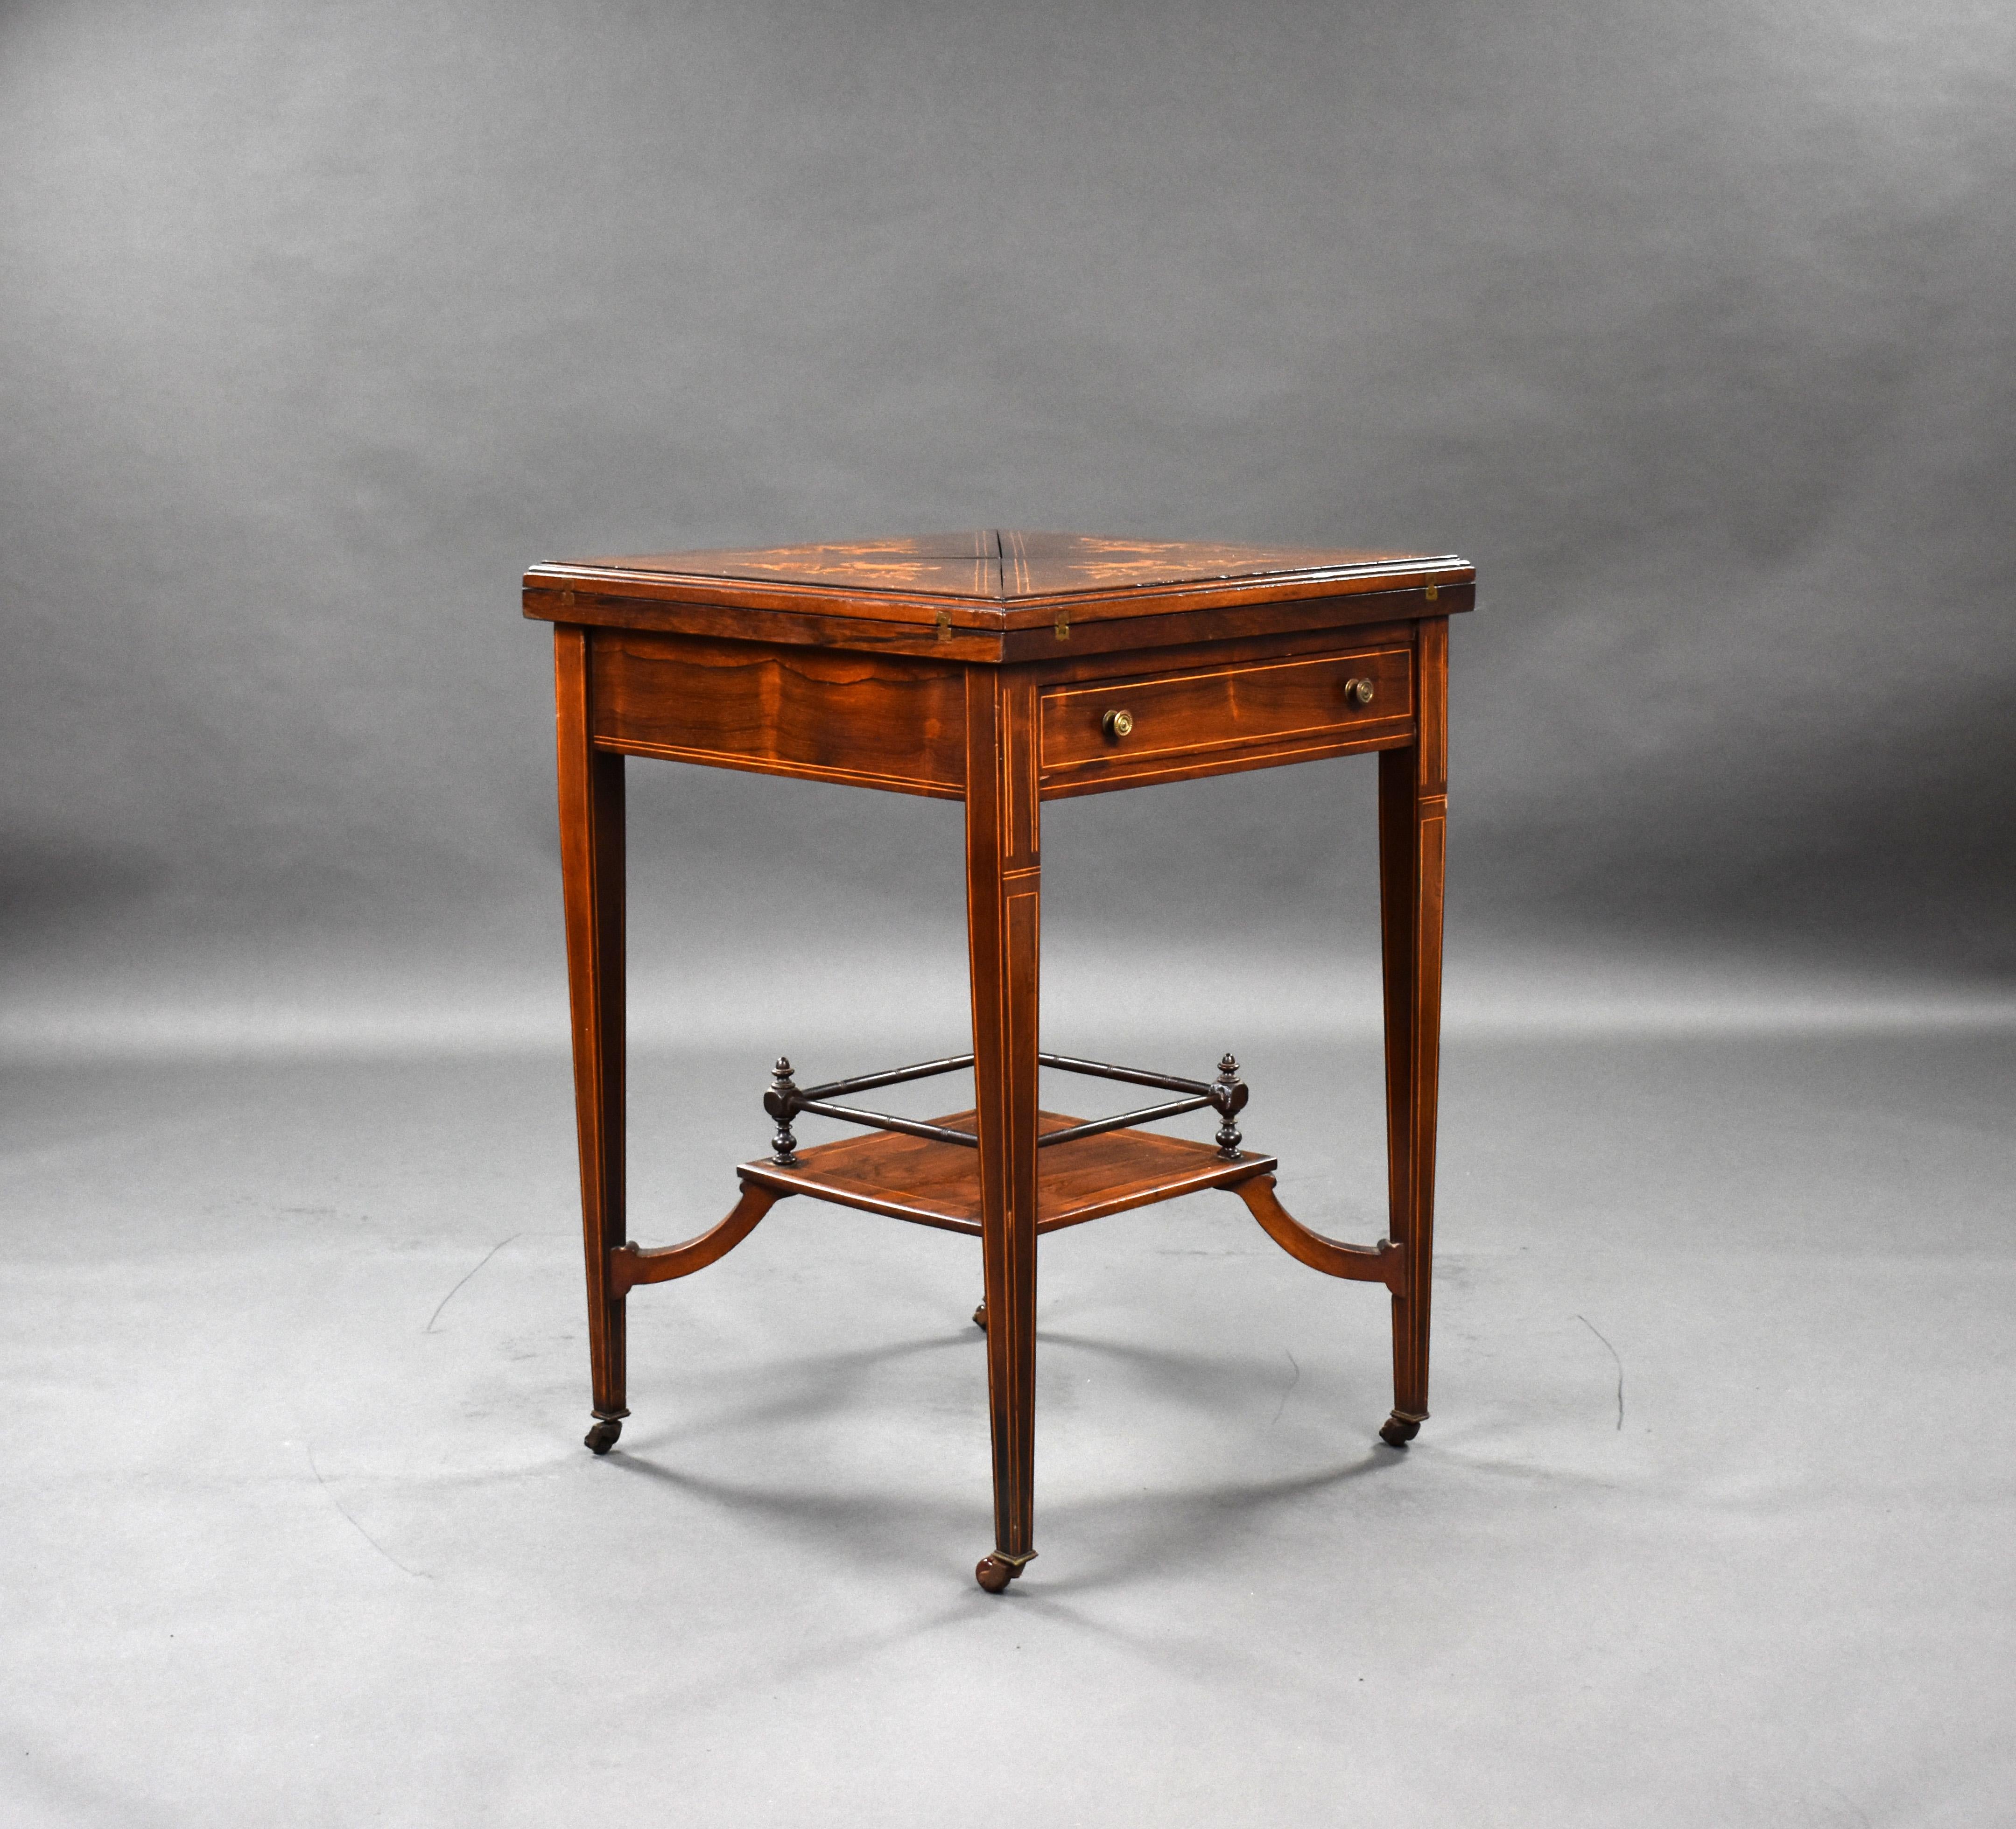 For sale is a good quality Victorian rosewood inlaid envelope card table, remaining in very good condition for its age. 

Measures: Width: 53cm Depth: 53cm Height: 73cm.